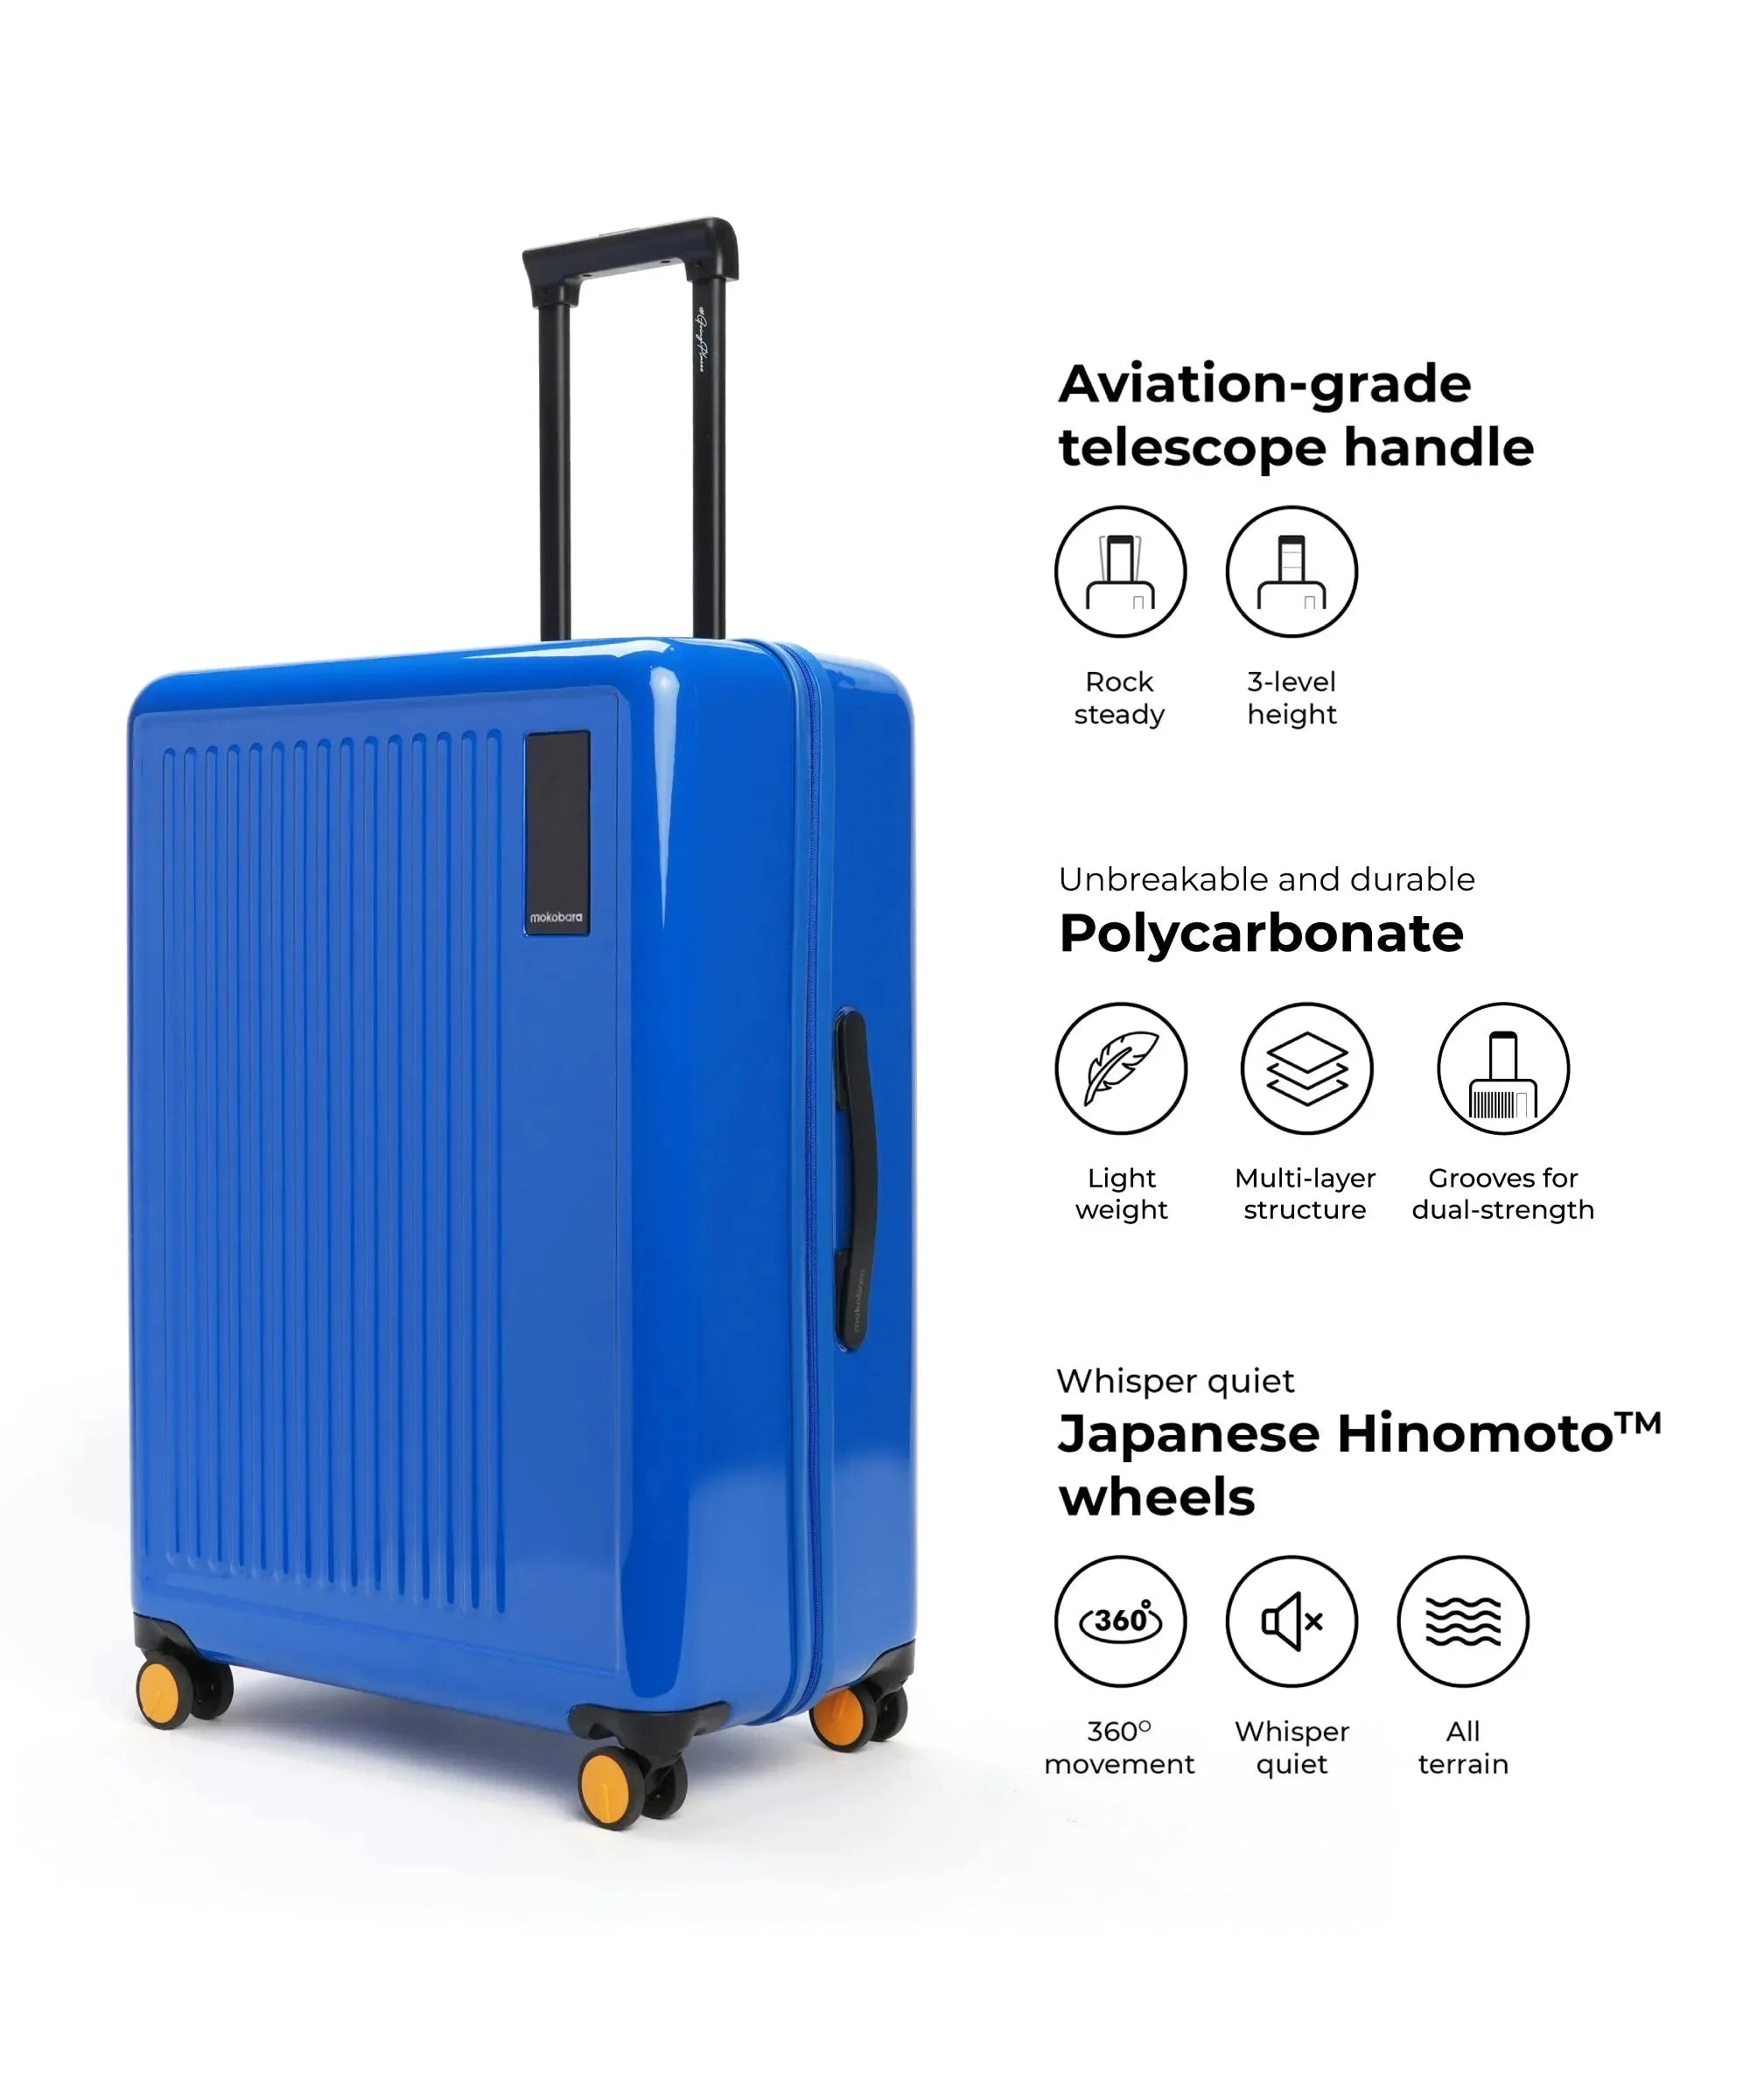 Color_Maximalist Blue (Gloss Edition) | The Transit Luggage - Check-in Large